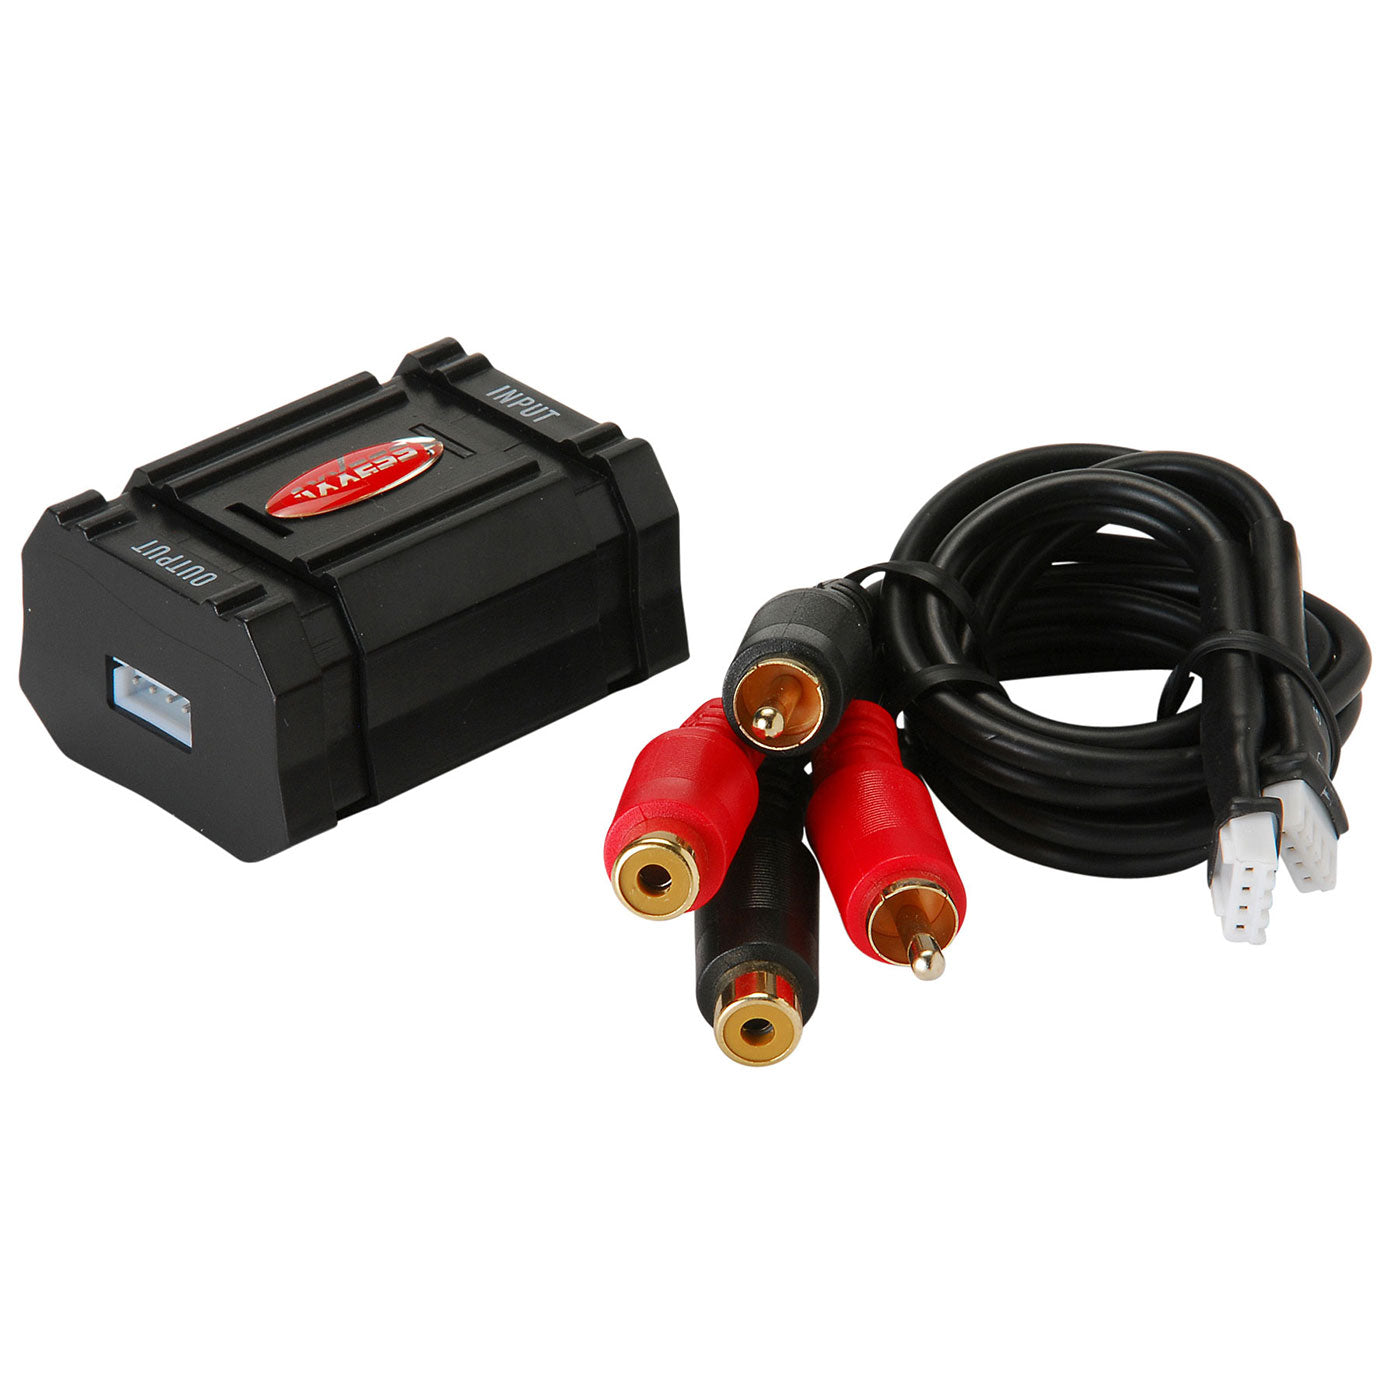 The MK1.7 Electronics have been designed to be a plug-and-play kit for providing power, audio and USB accessory for your tablet installation.  Simply unplug your OEM stereo, and plug in the MK1.7 Electronics directly into your factory stereo harness.